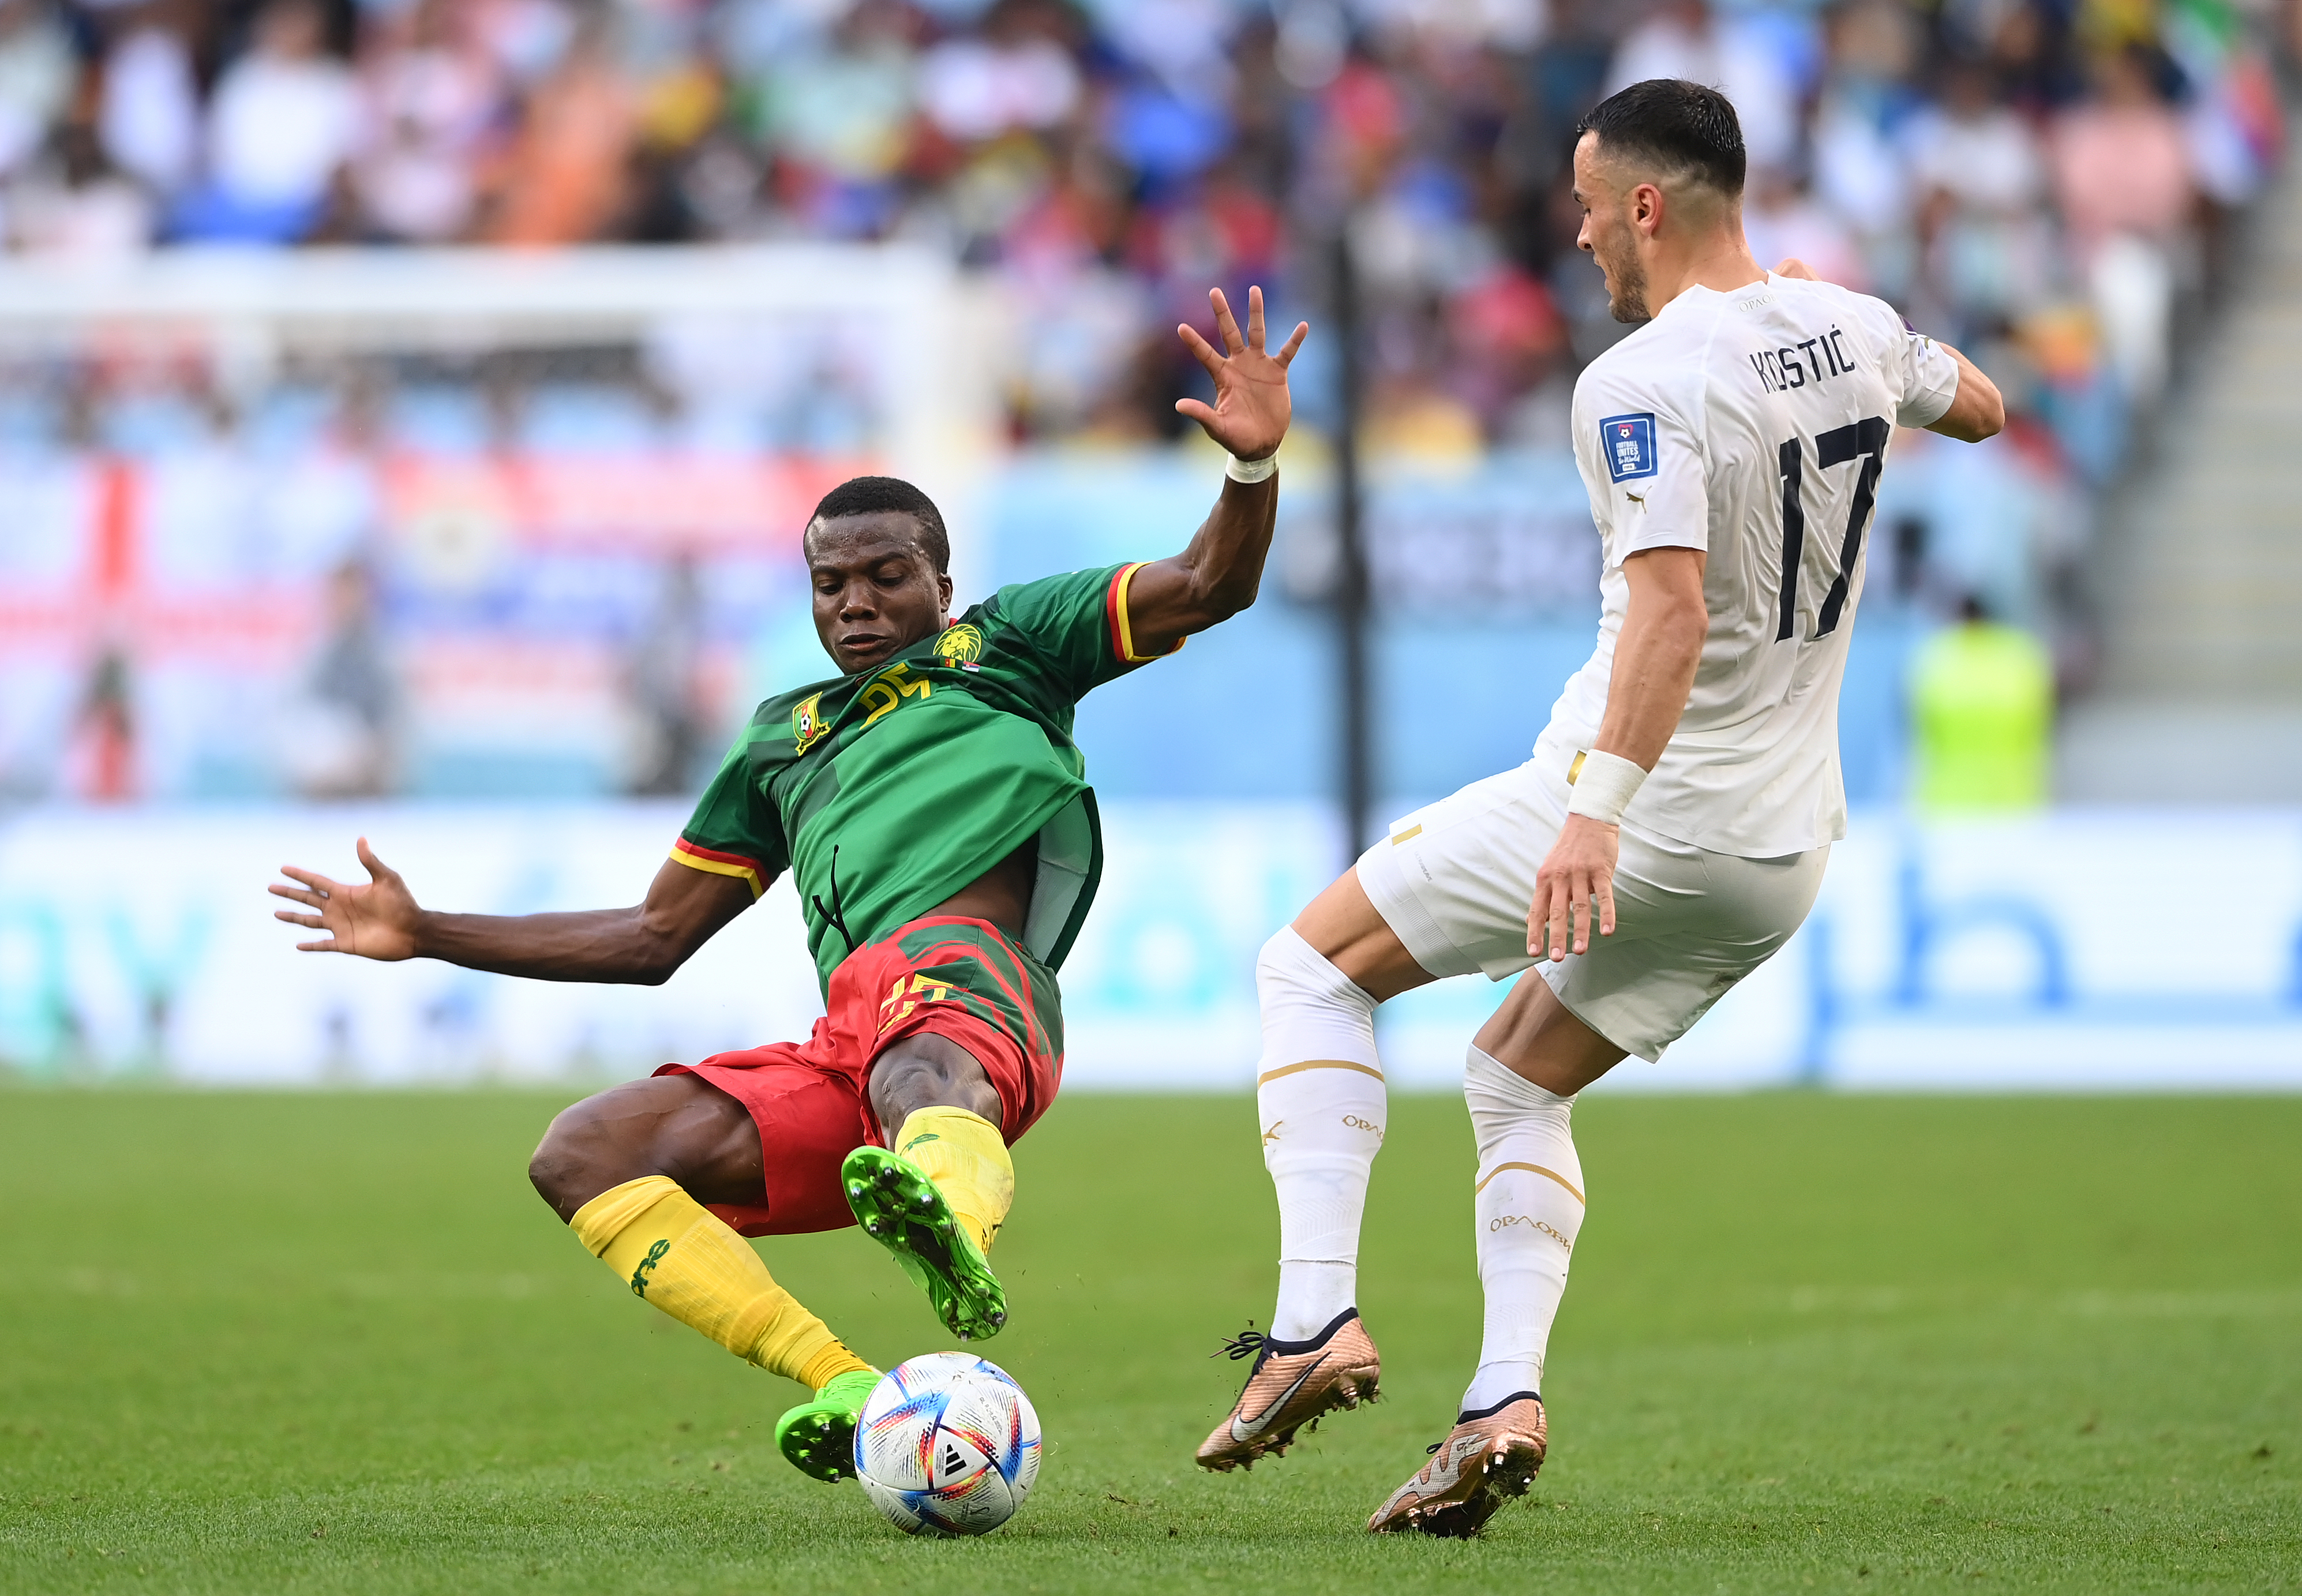 Cameroon v Serbia: Group G - FIFA World Cup Qatar 2022. Nouhou flies in for a tackle against Serbian player Filip Kostic, arms stretched wide and both feet off the ground.